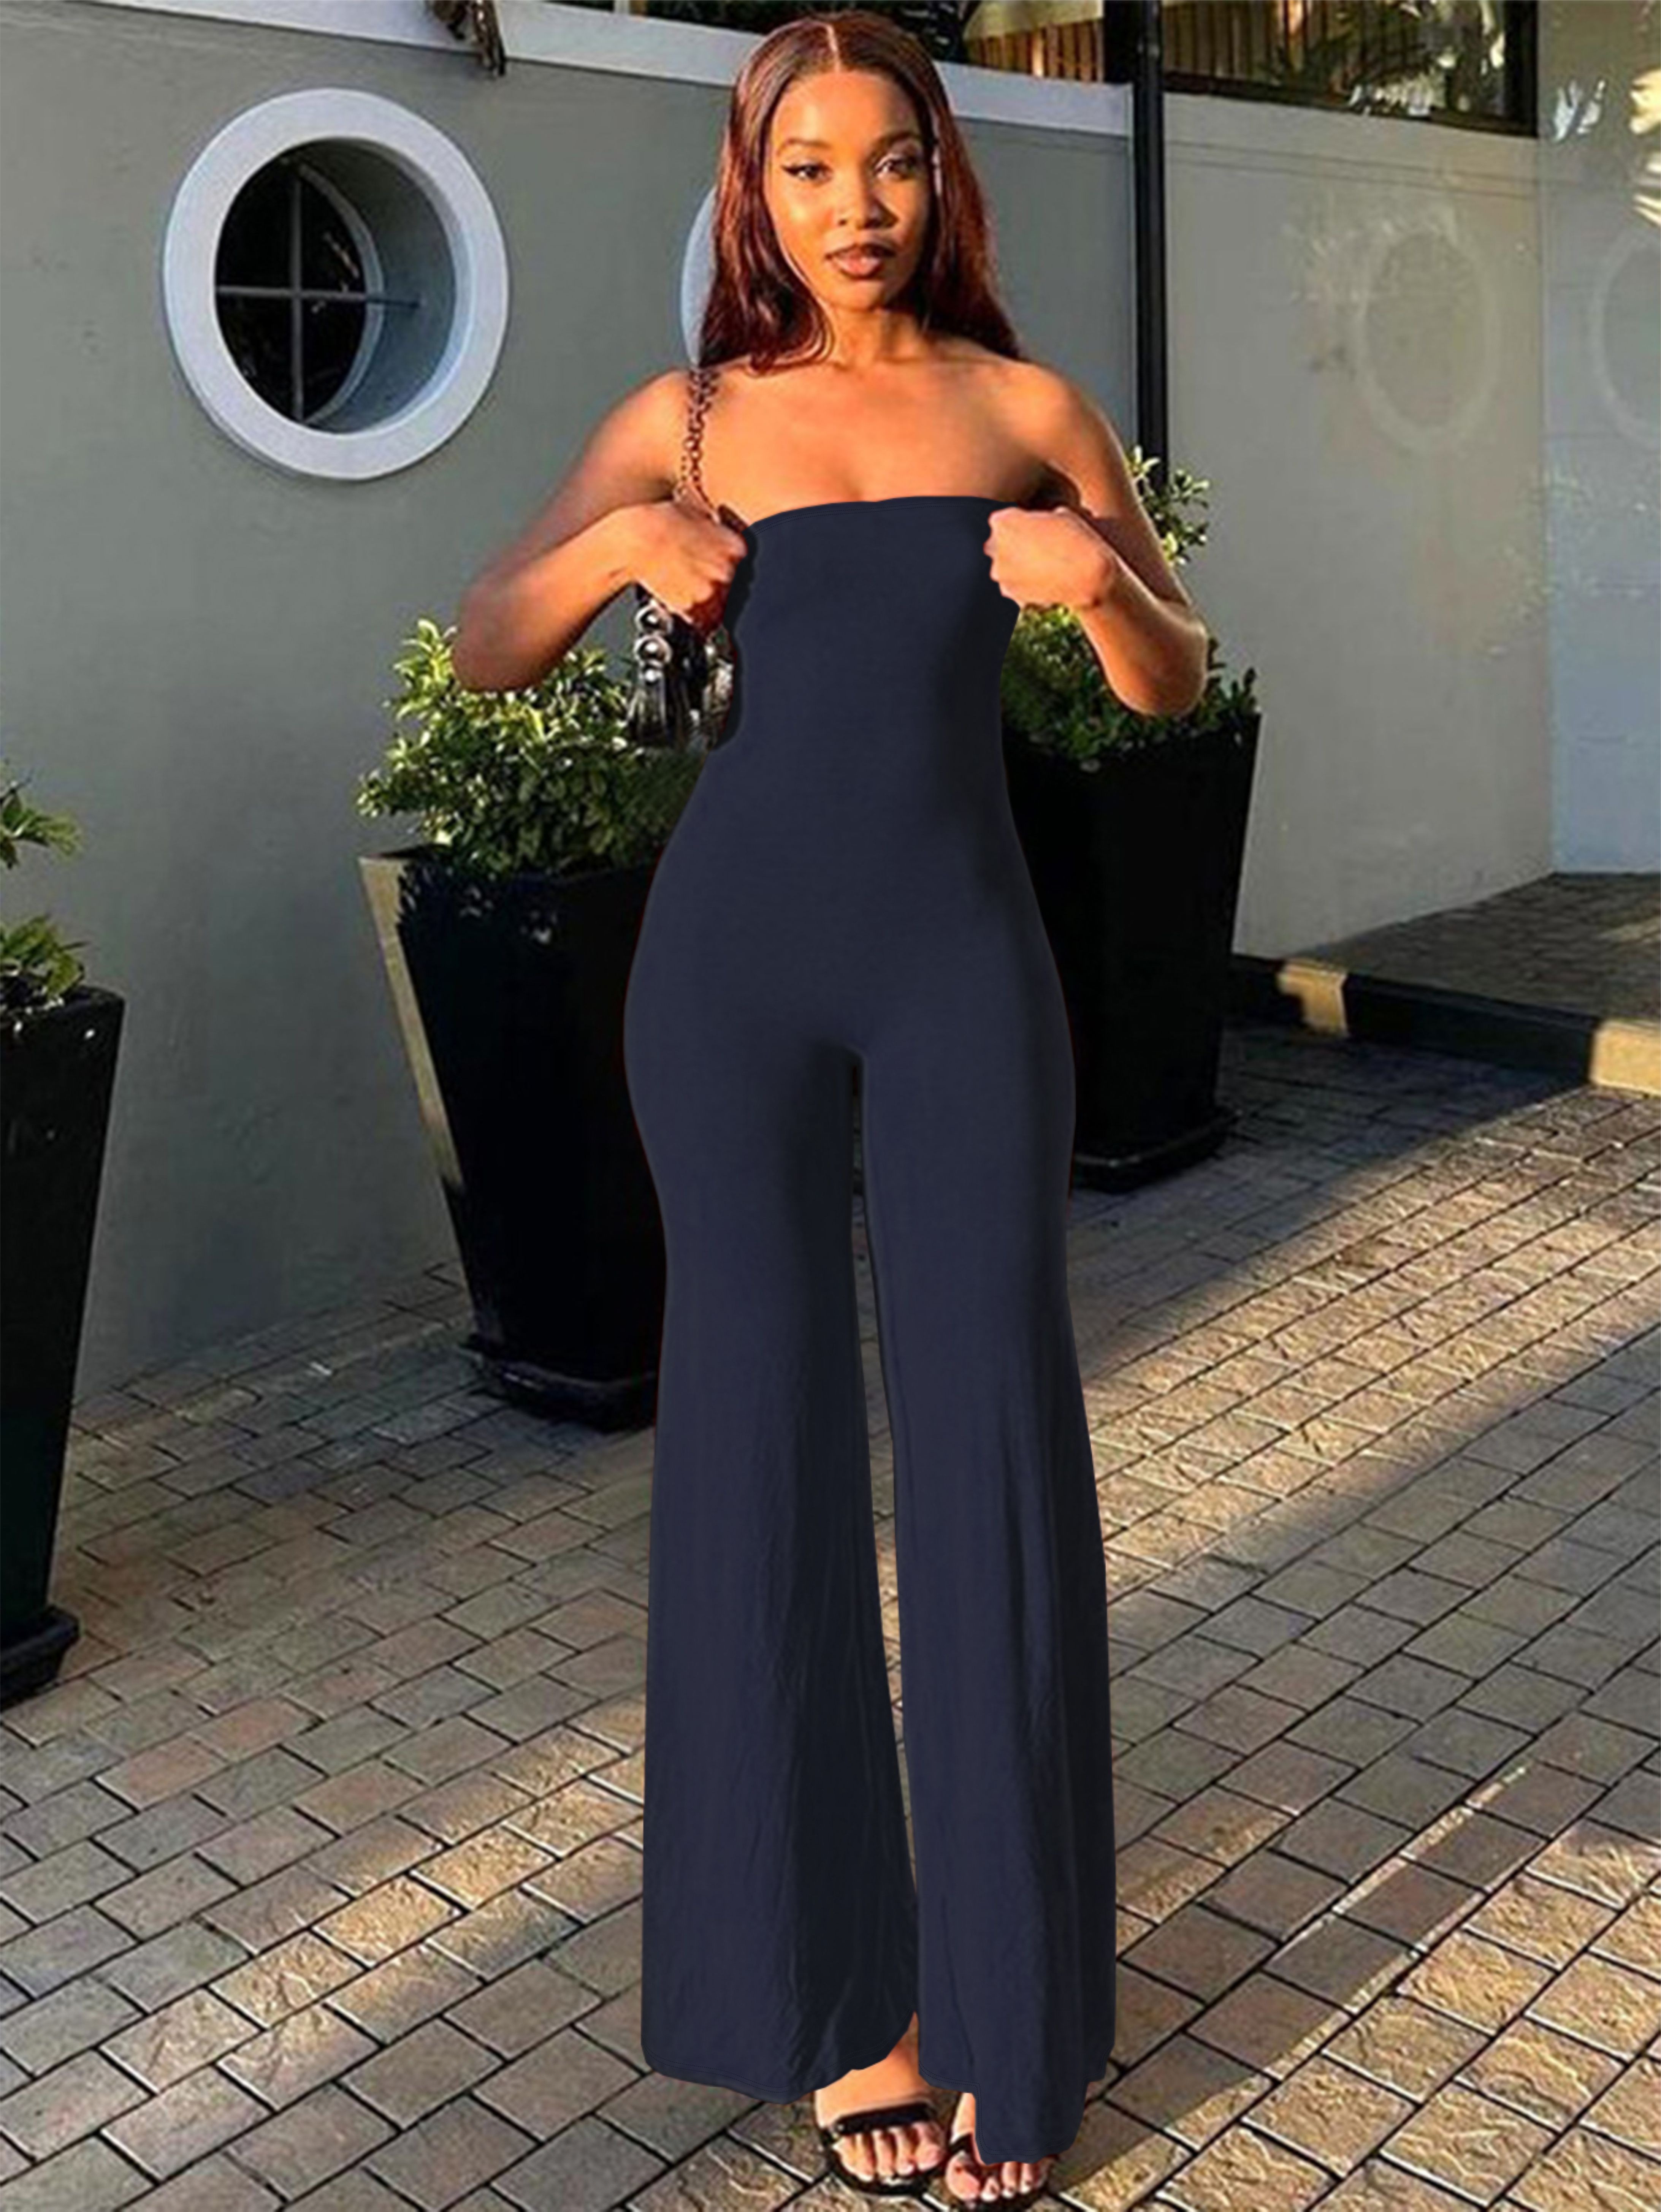 Solid Strapless Jumpsuit Black  Pretty girl outfits, Dressy